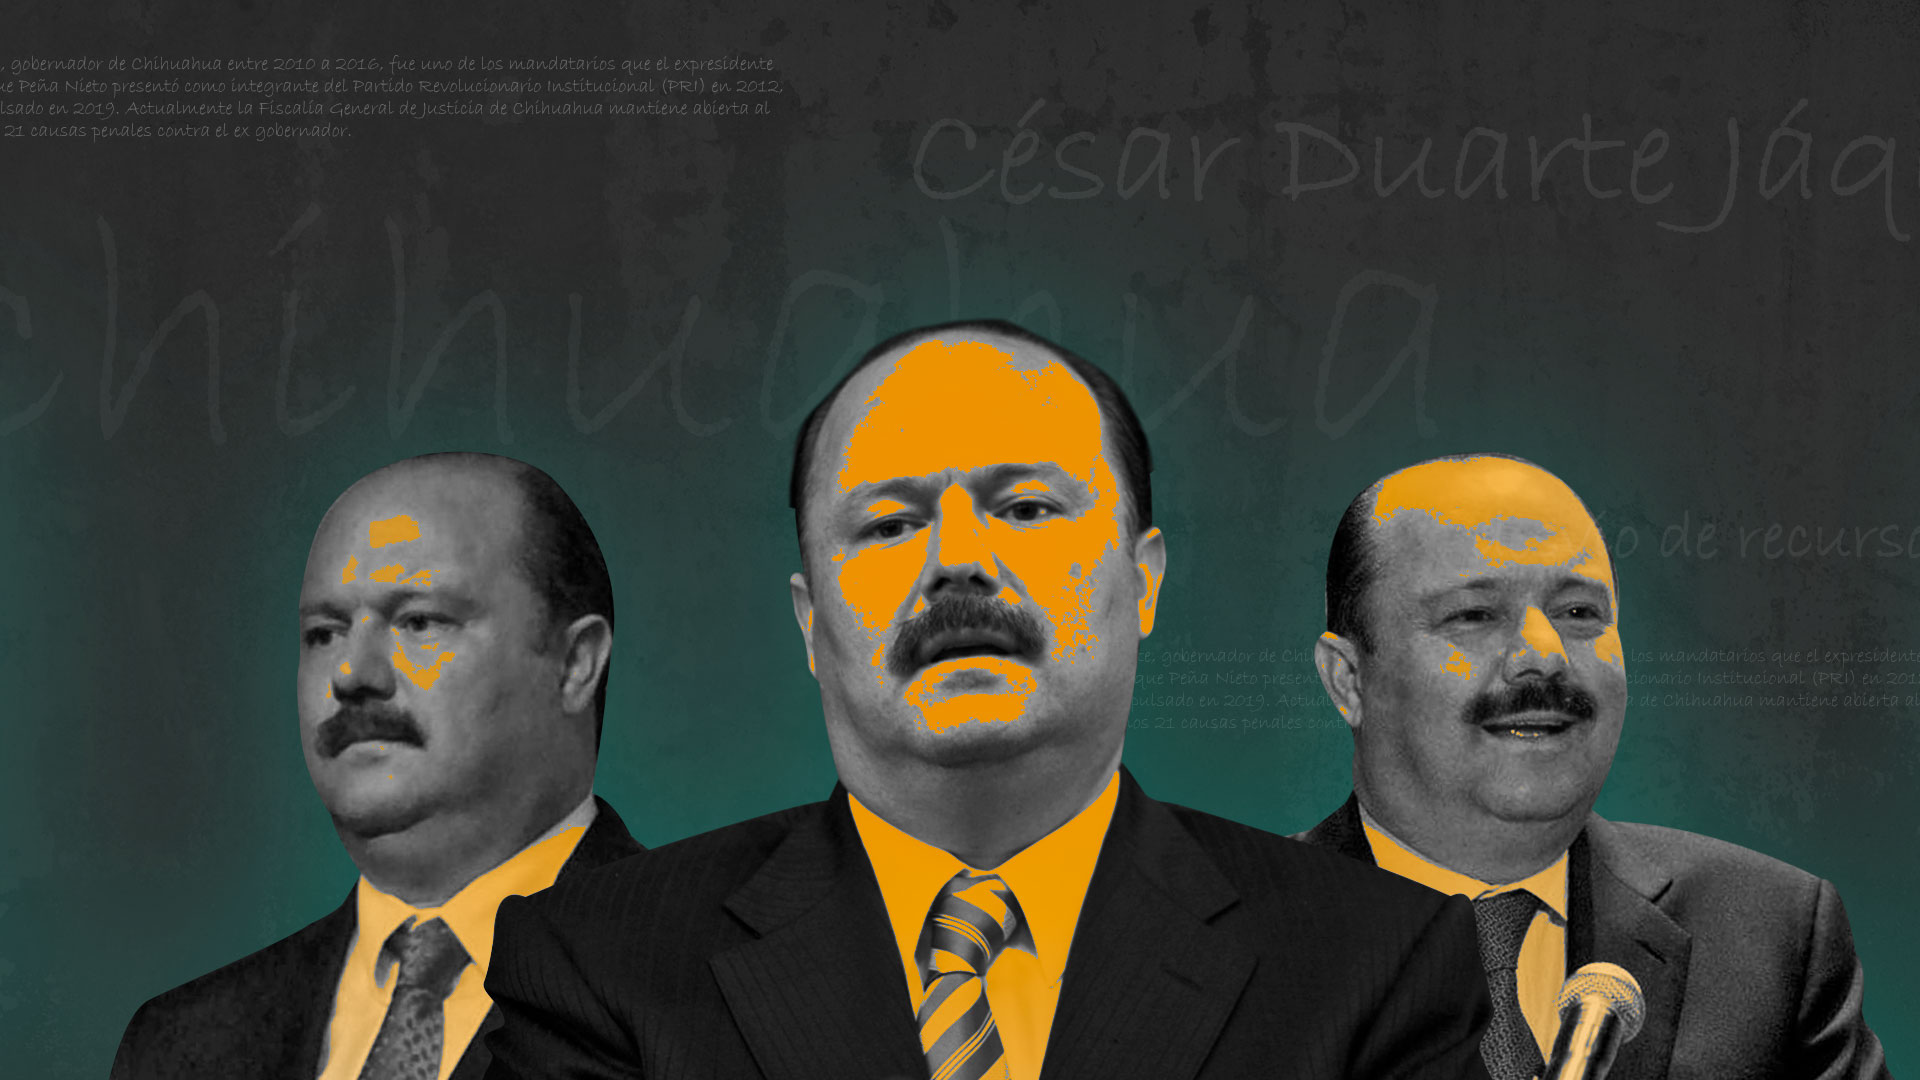 The defense of César Duarte seeks to continue his process in freedom (Special)